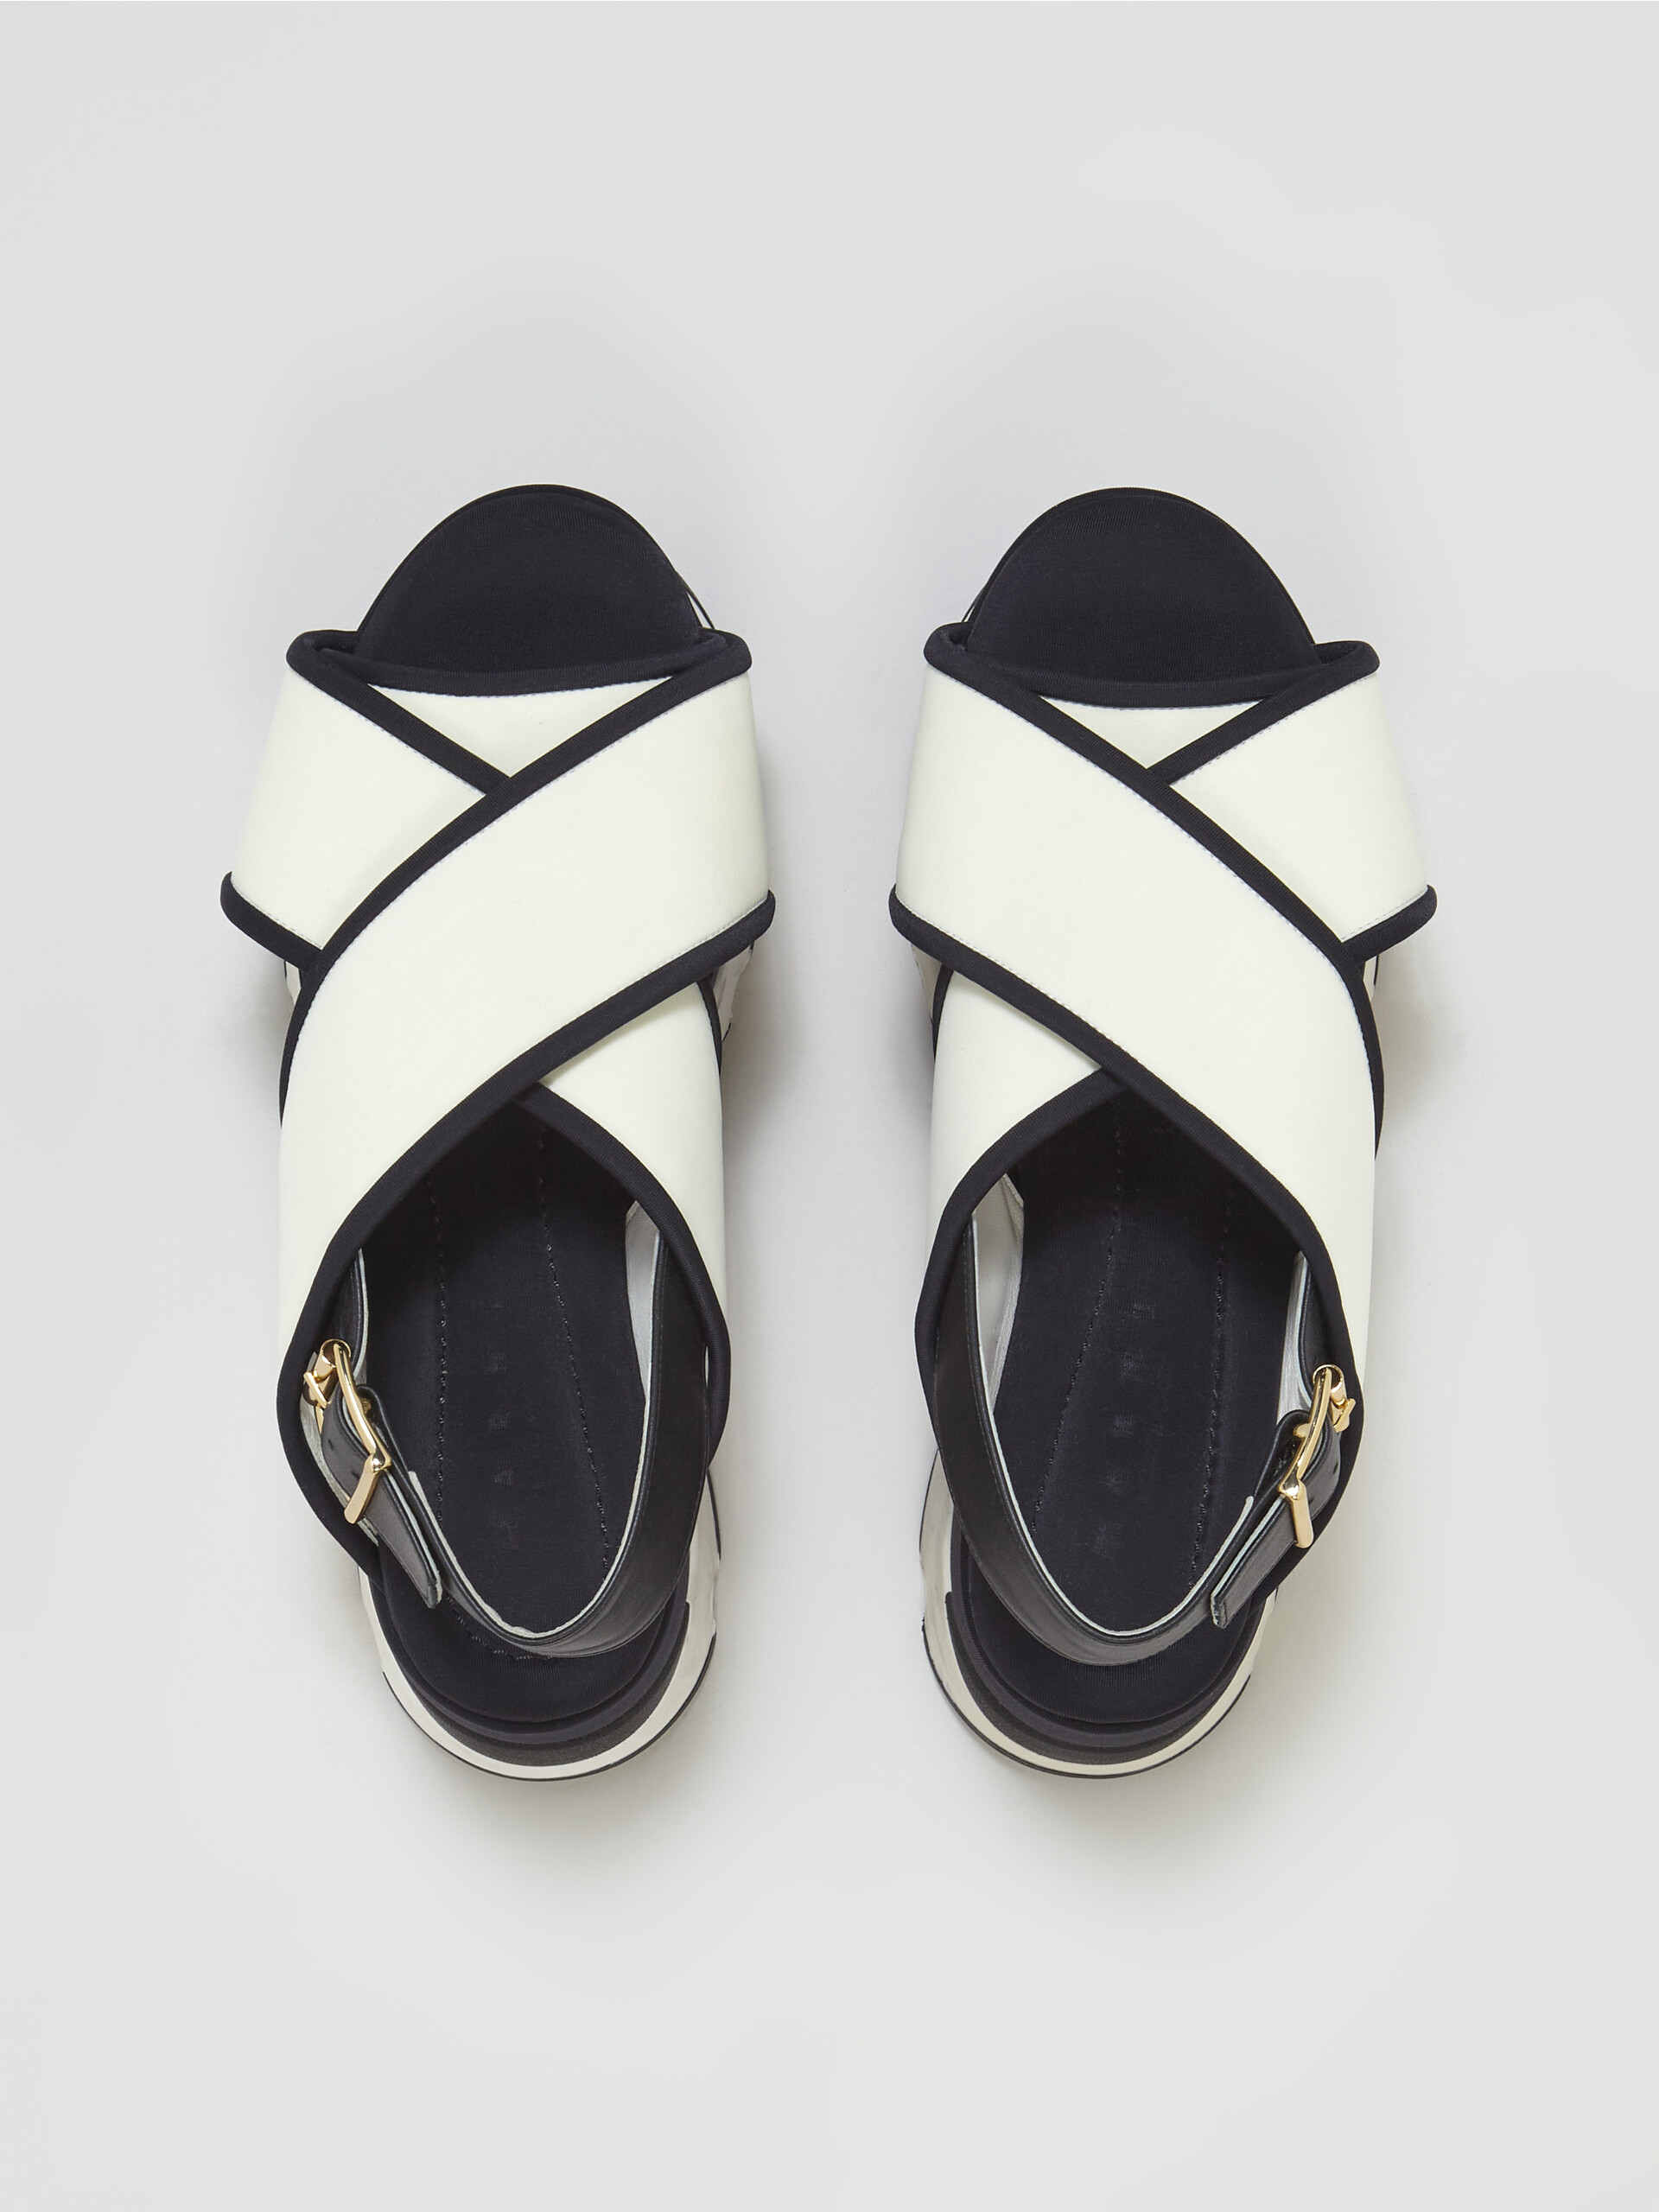 White and black technical fabric wedge sandal - Sandals - Image 4